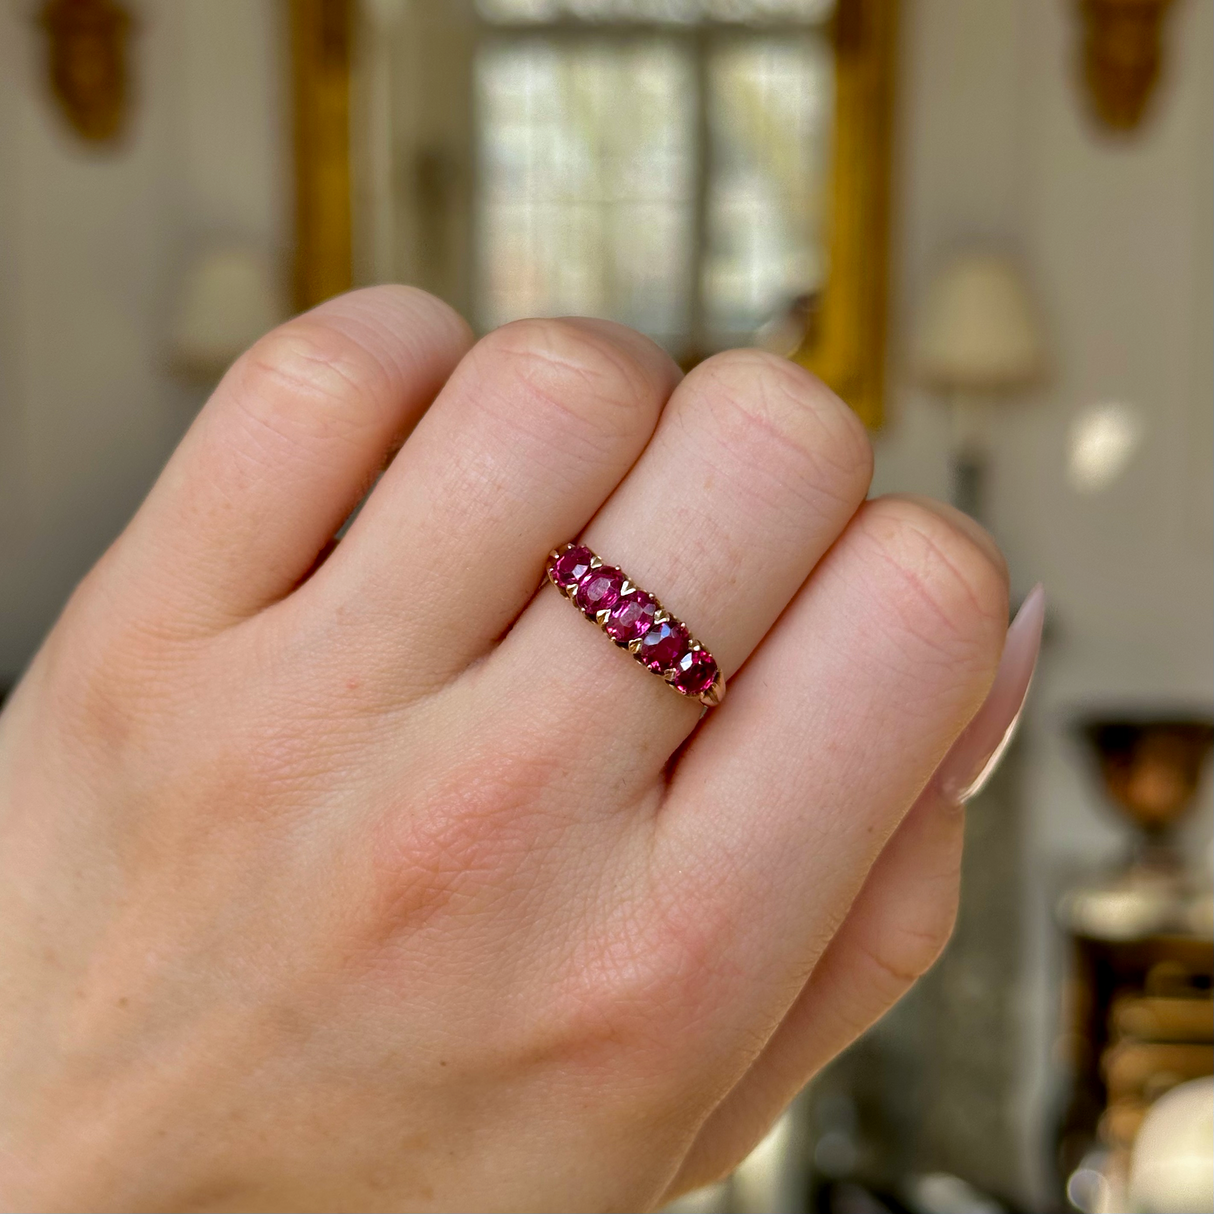 Antique, Edwardian Five Stone Ruby Ring, Yellow Gold, worn on hand.